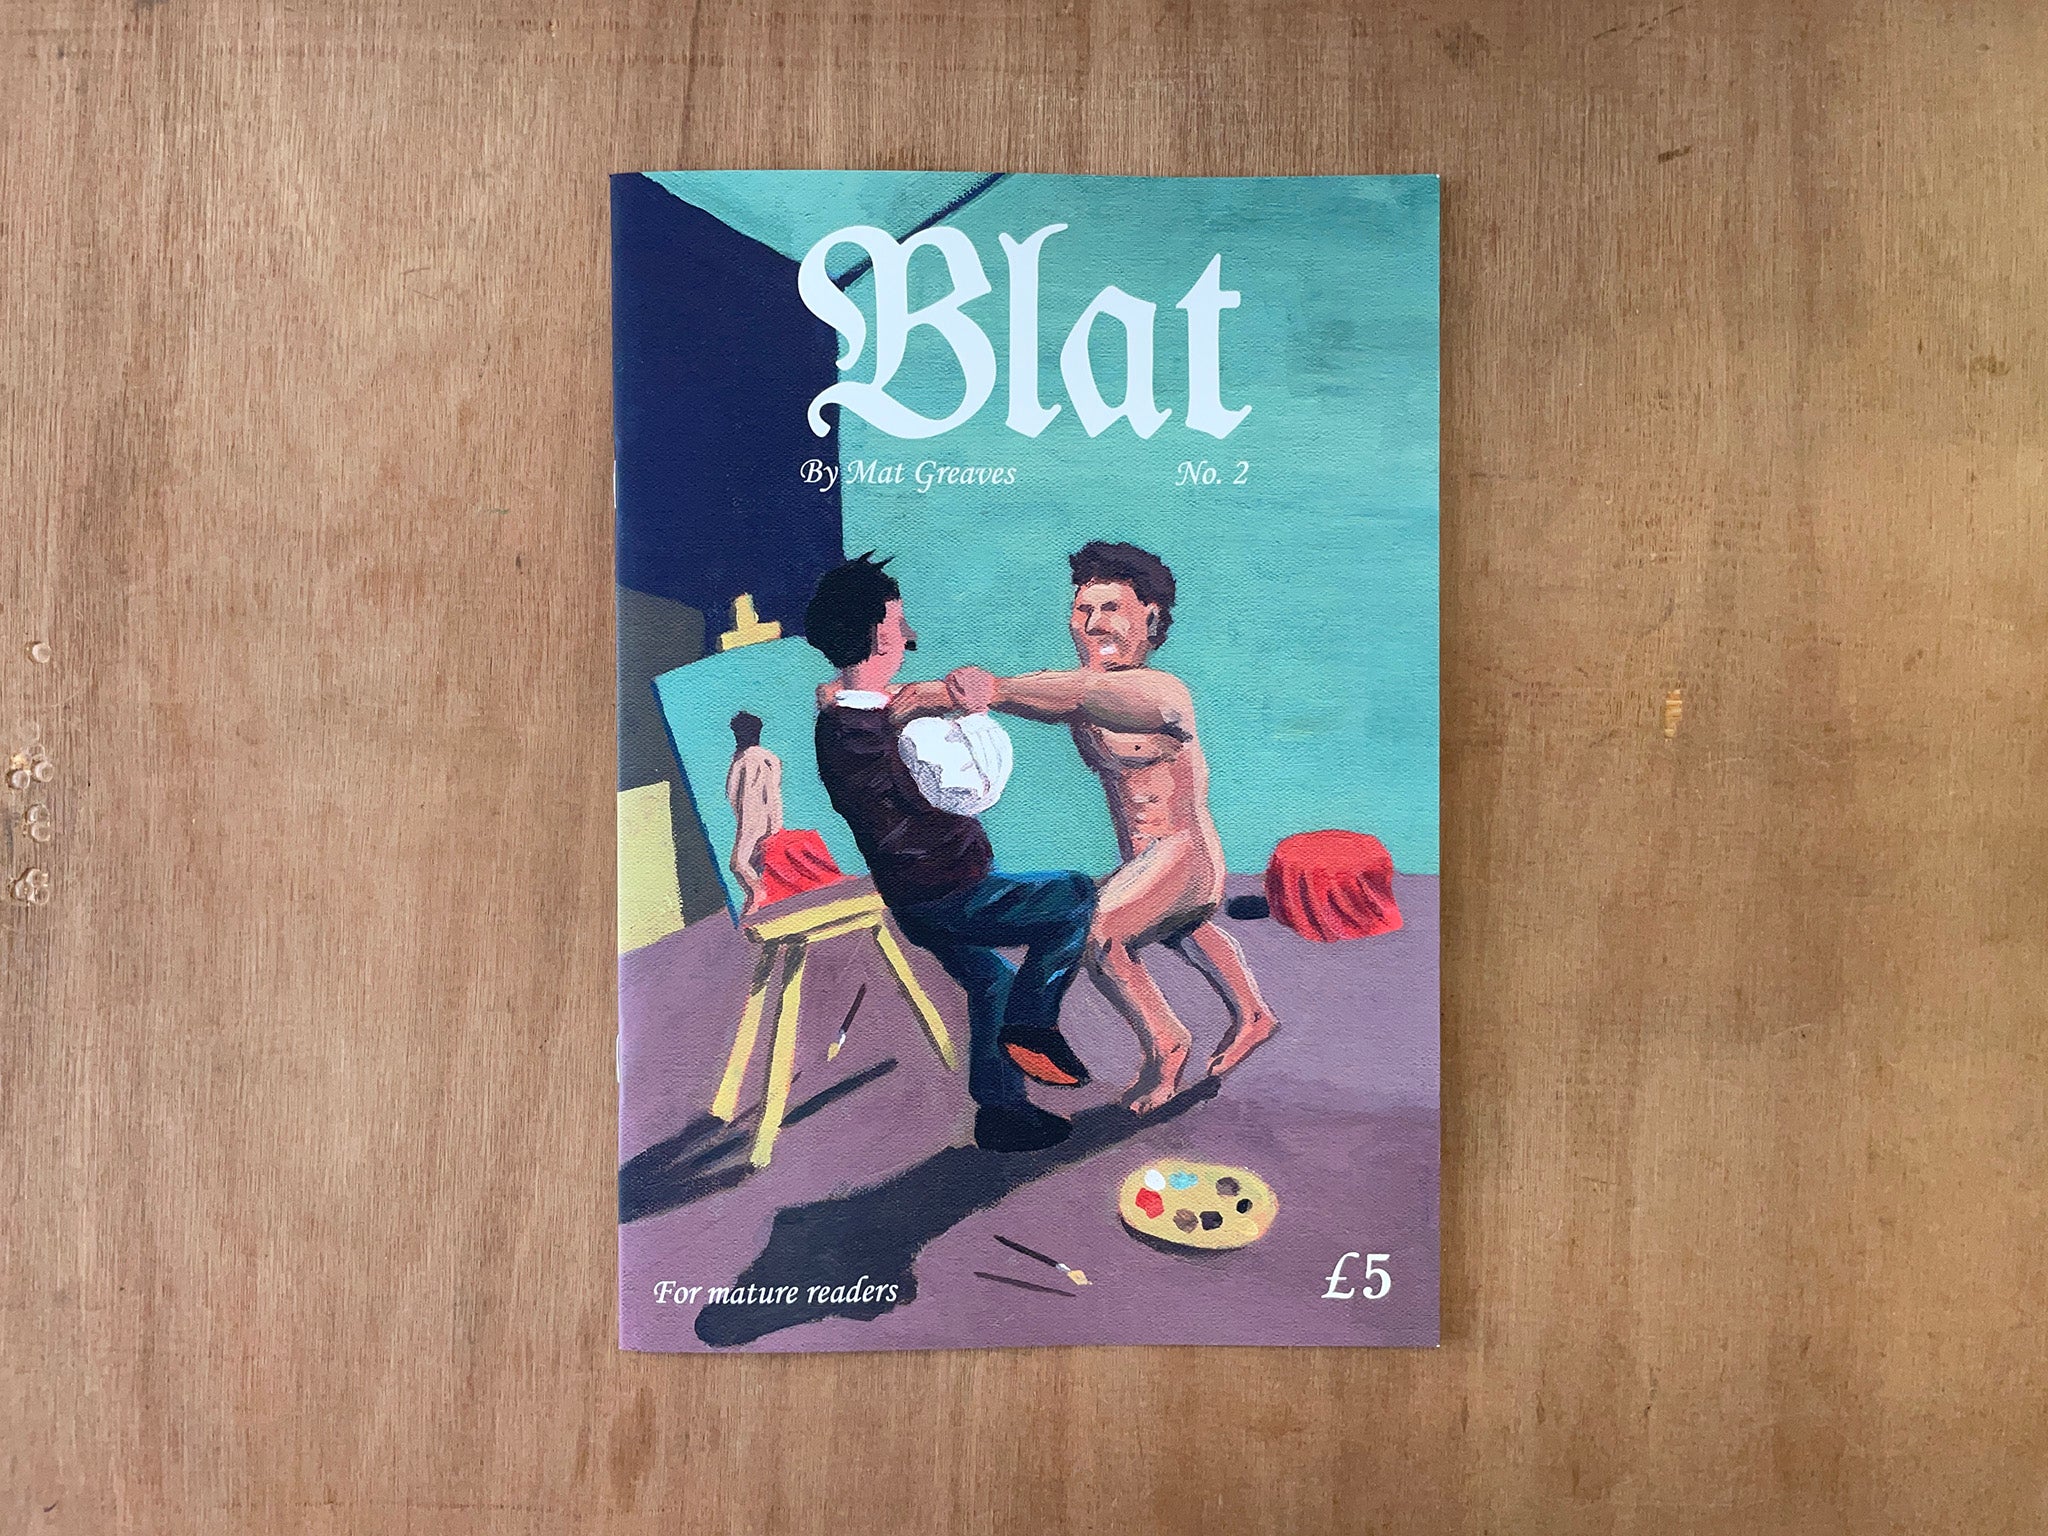 BLAT #2 by Mat Greaves